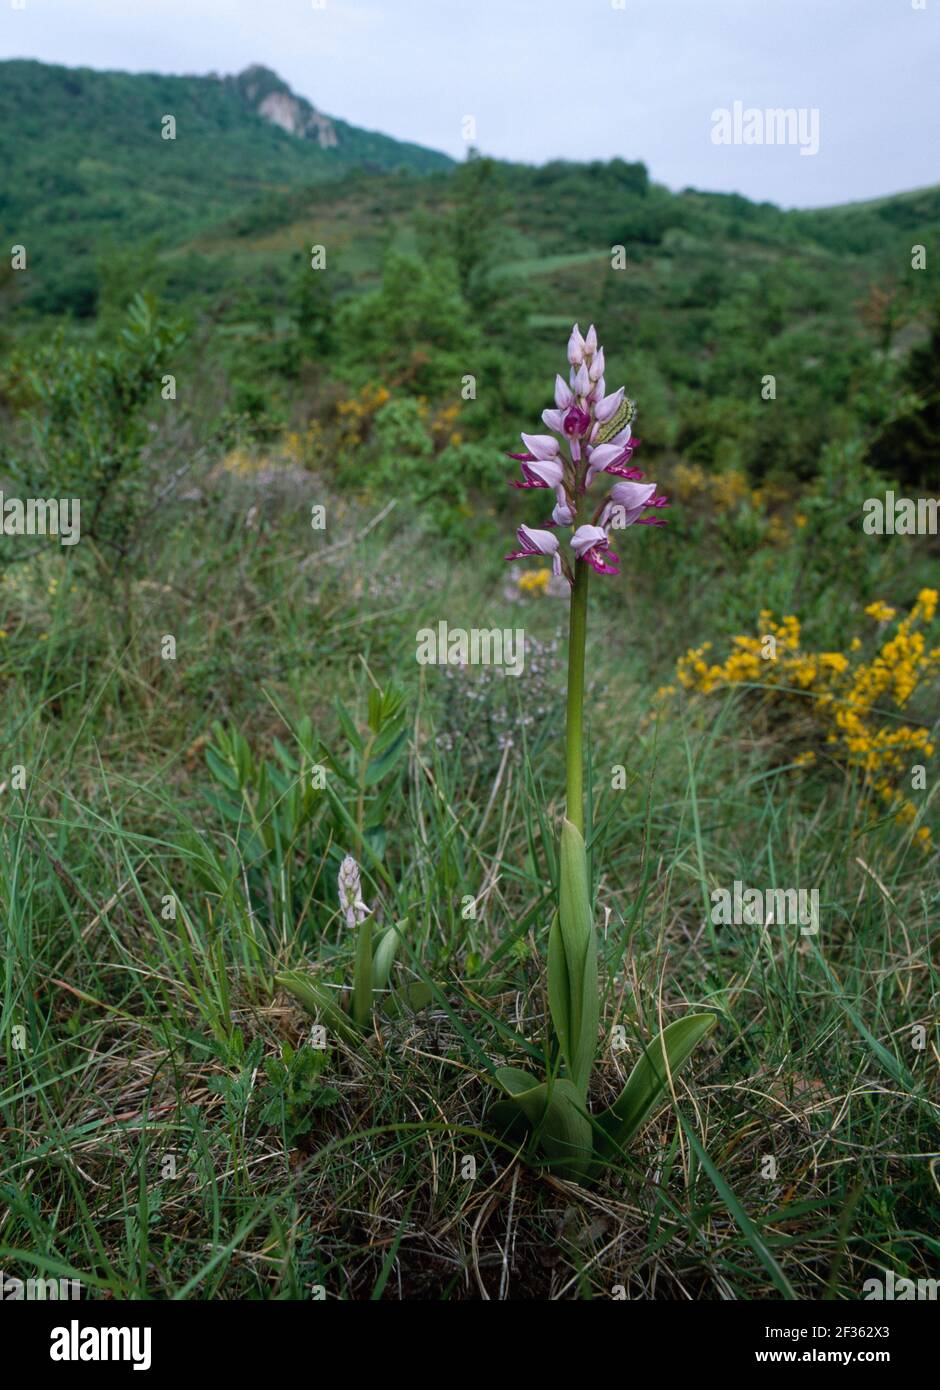 MILITARY ORCHID in flower Orchis militaris Bugarach, Southern France., Credit:Robert Thompson / Avalon Stock Photo